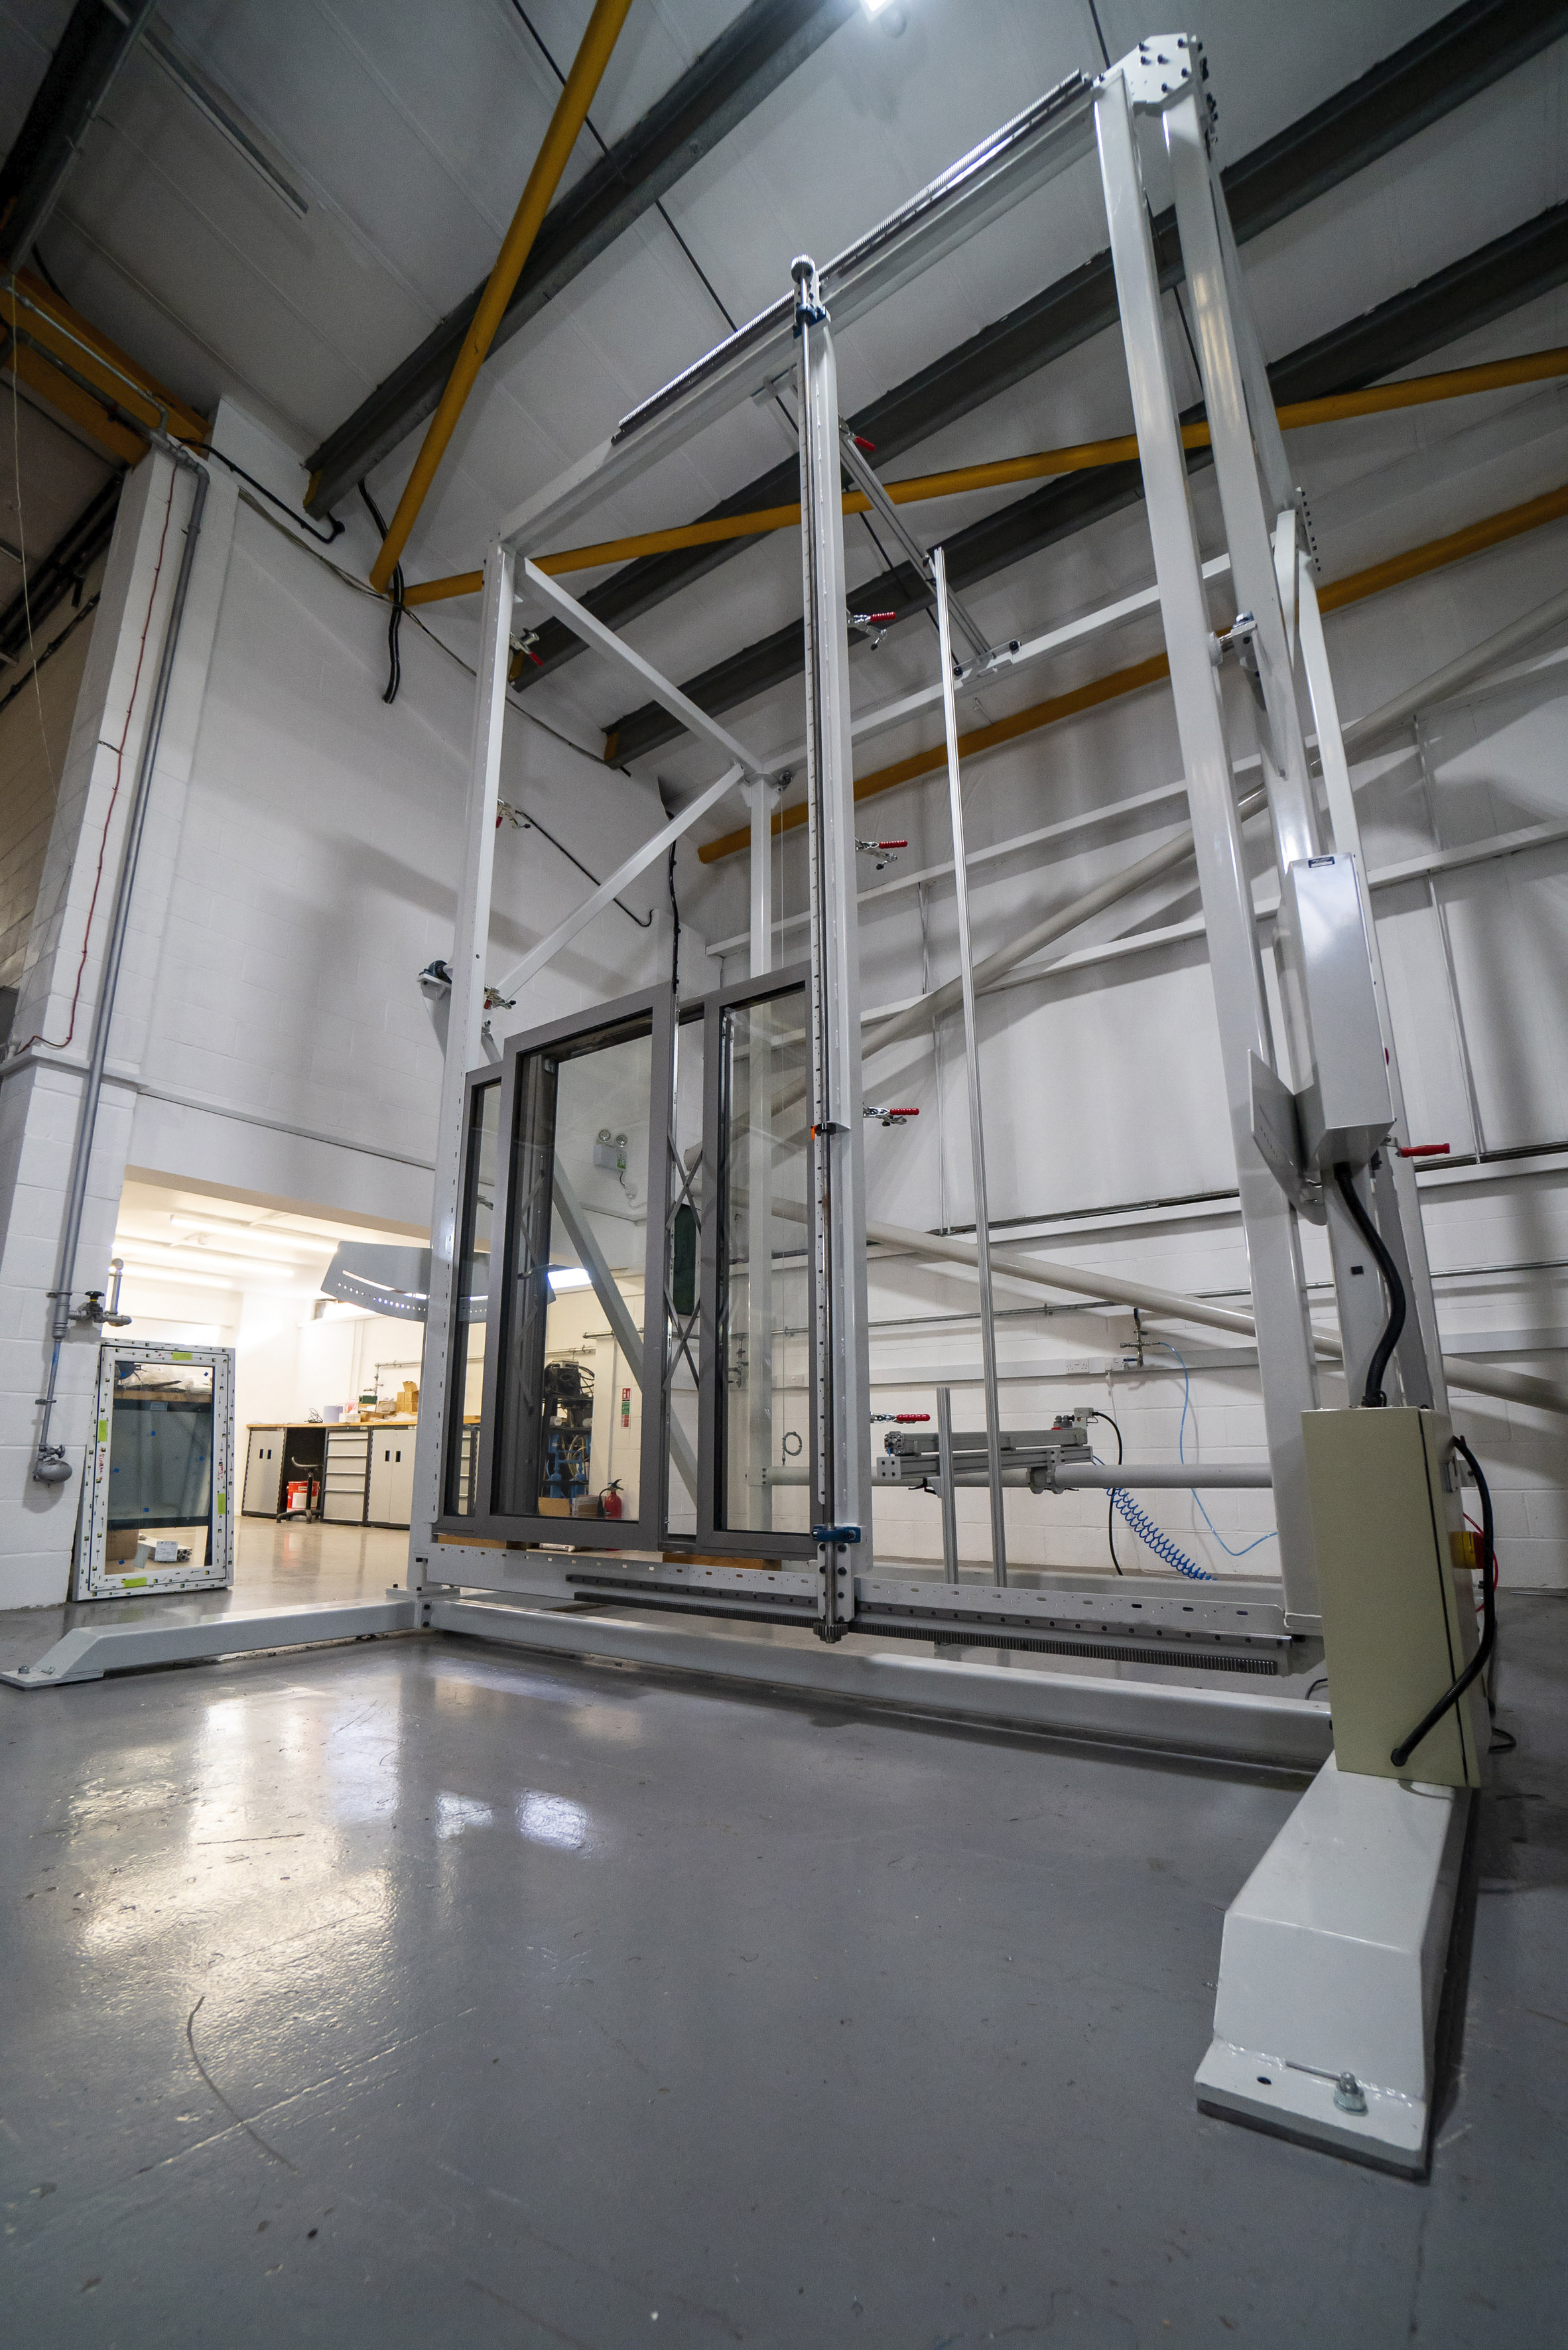 Yale puts its capabilities to the test with a new large scale testing